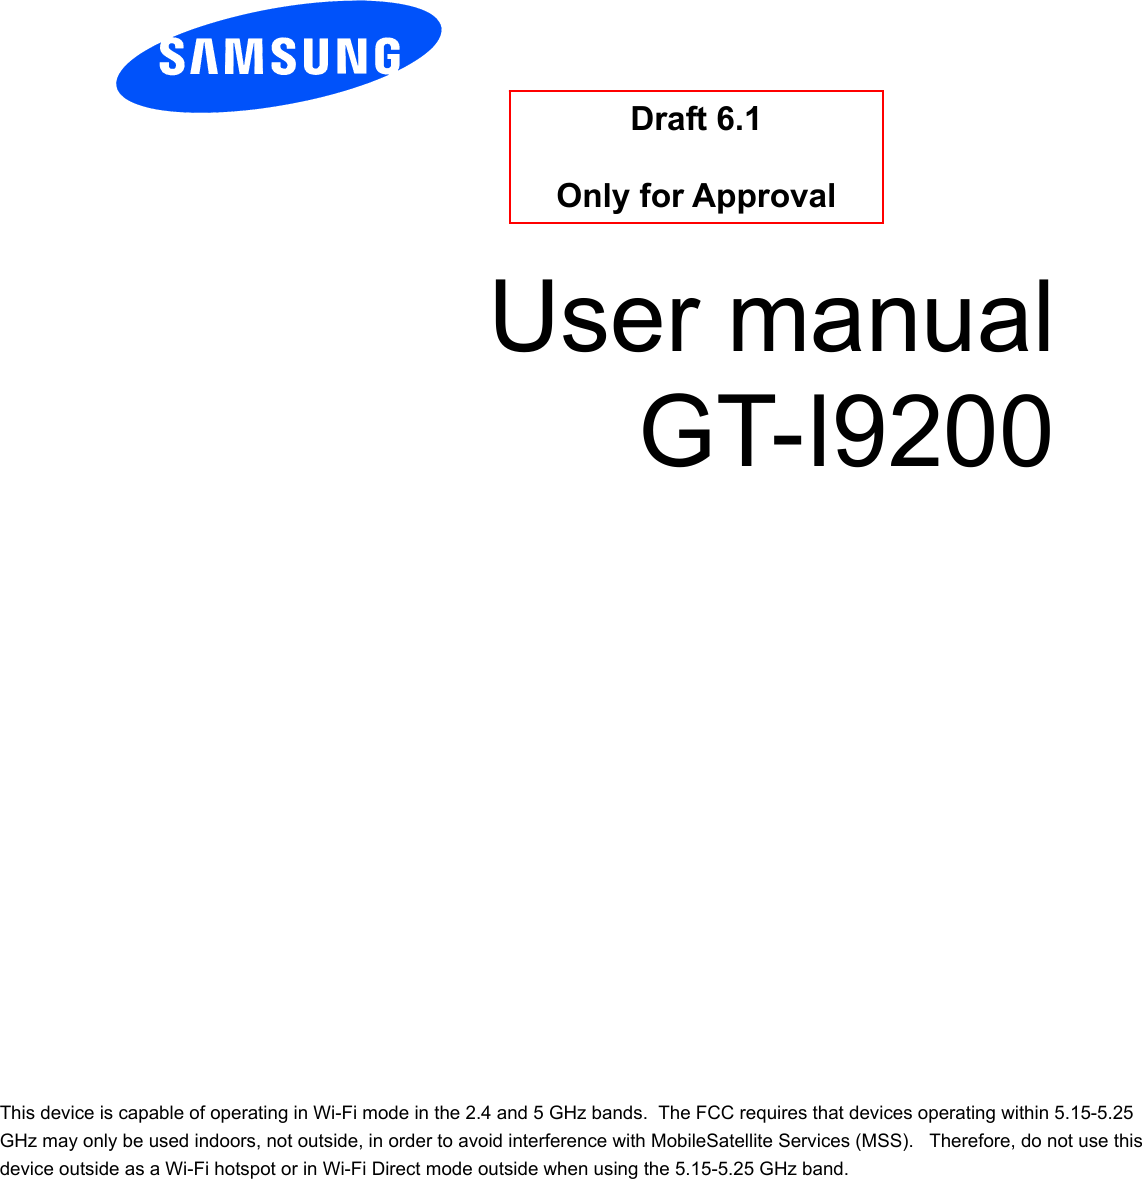          User manual GT-I9200          Draft 6.1   Only for Approval This device is capable of operating in Wi-Fi mode in the 2.4 and 5 GHz bands.  The FCC requires that devices operating within 5.15-5.25 GHz may only be used indoors, not outside, in order to avoid interference with MobileSatellite Services (MSS).   Therefore, do not use this device outside as a Wi-Fi hotspot or in Wi-Fi Direct mode outside when using the 5.15-5.25 GHz band. 